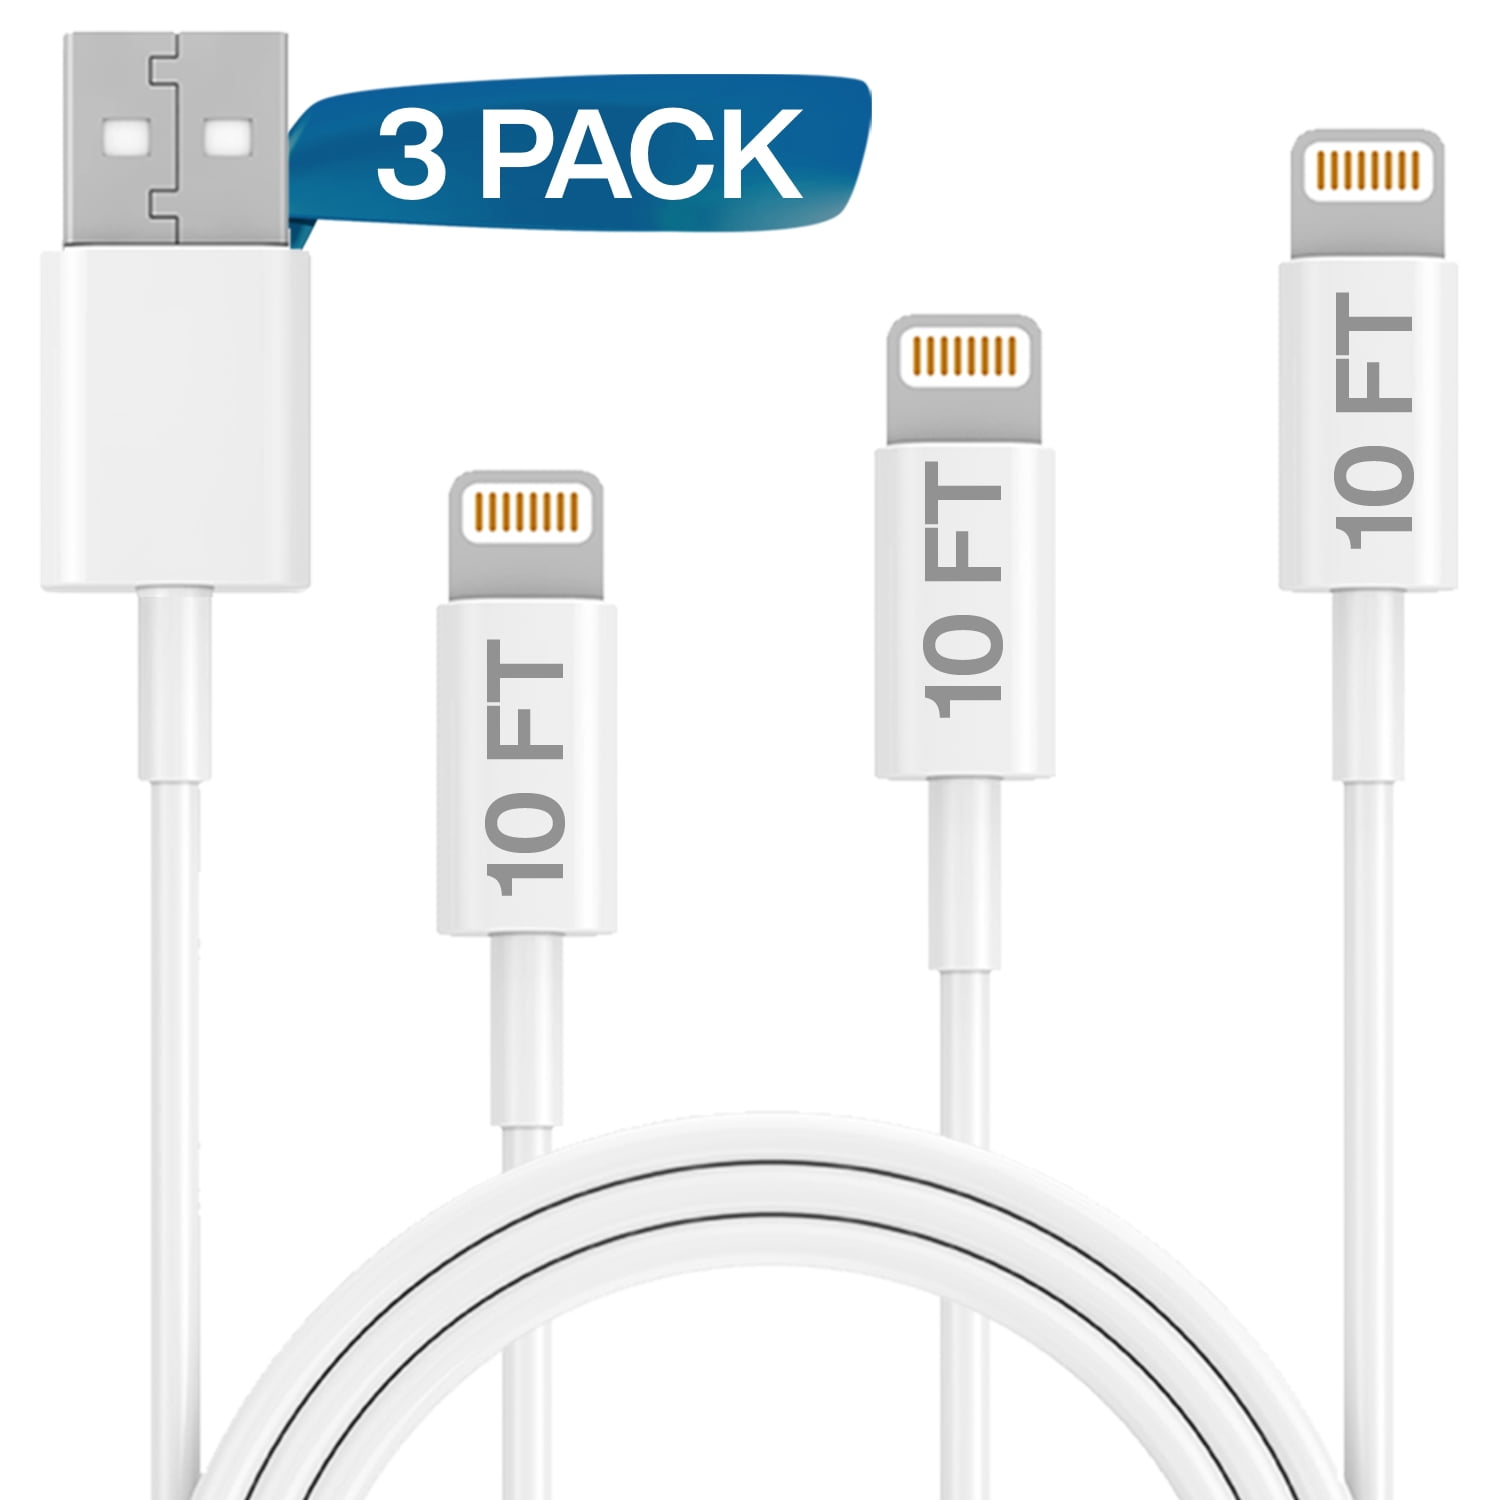 MFi Certified 3Pack 10 FT Lightning Cable Nylon Braided USB Charging Cord Compatible with iPhone 11/XS/XS Max/XR/X/8/8Plus/7/7Plus/6/6S Plus/SE/5/iPad/Nano,Silvergrey iPhone Charger 